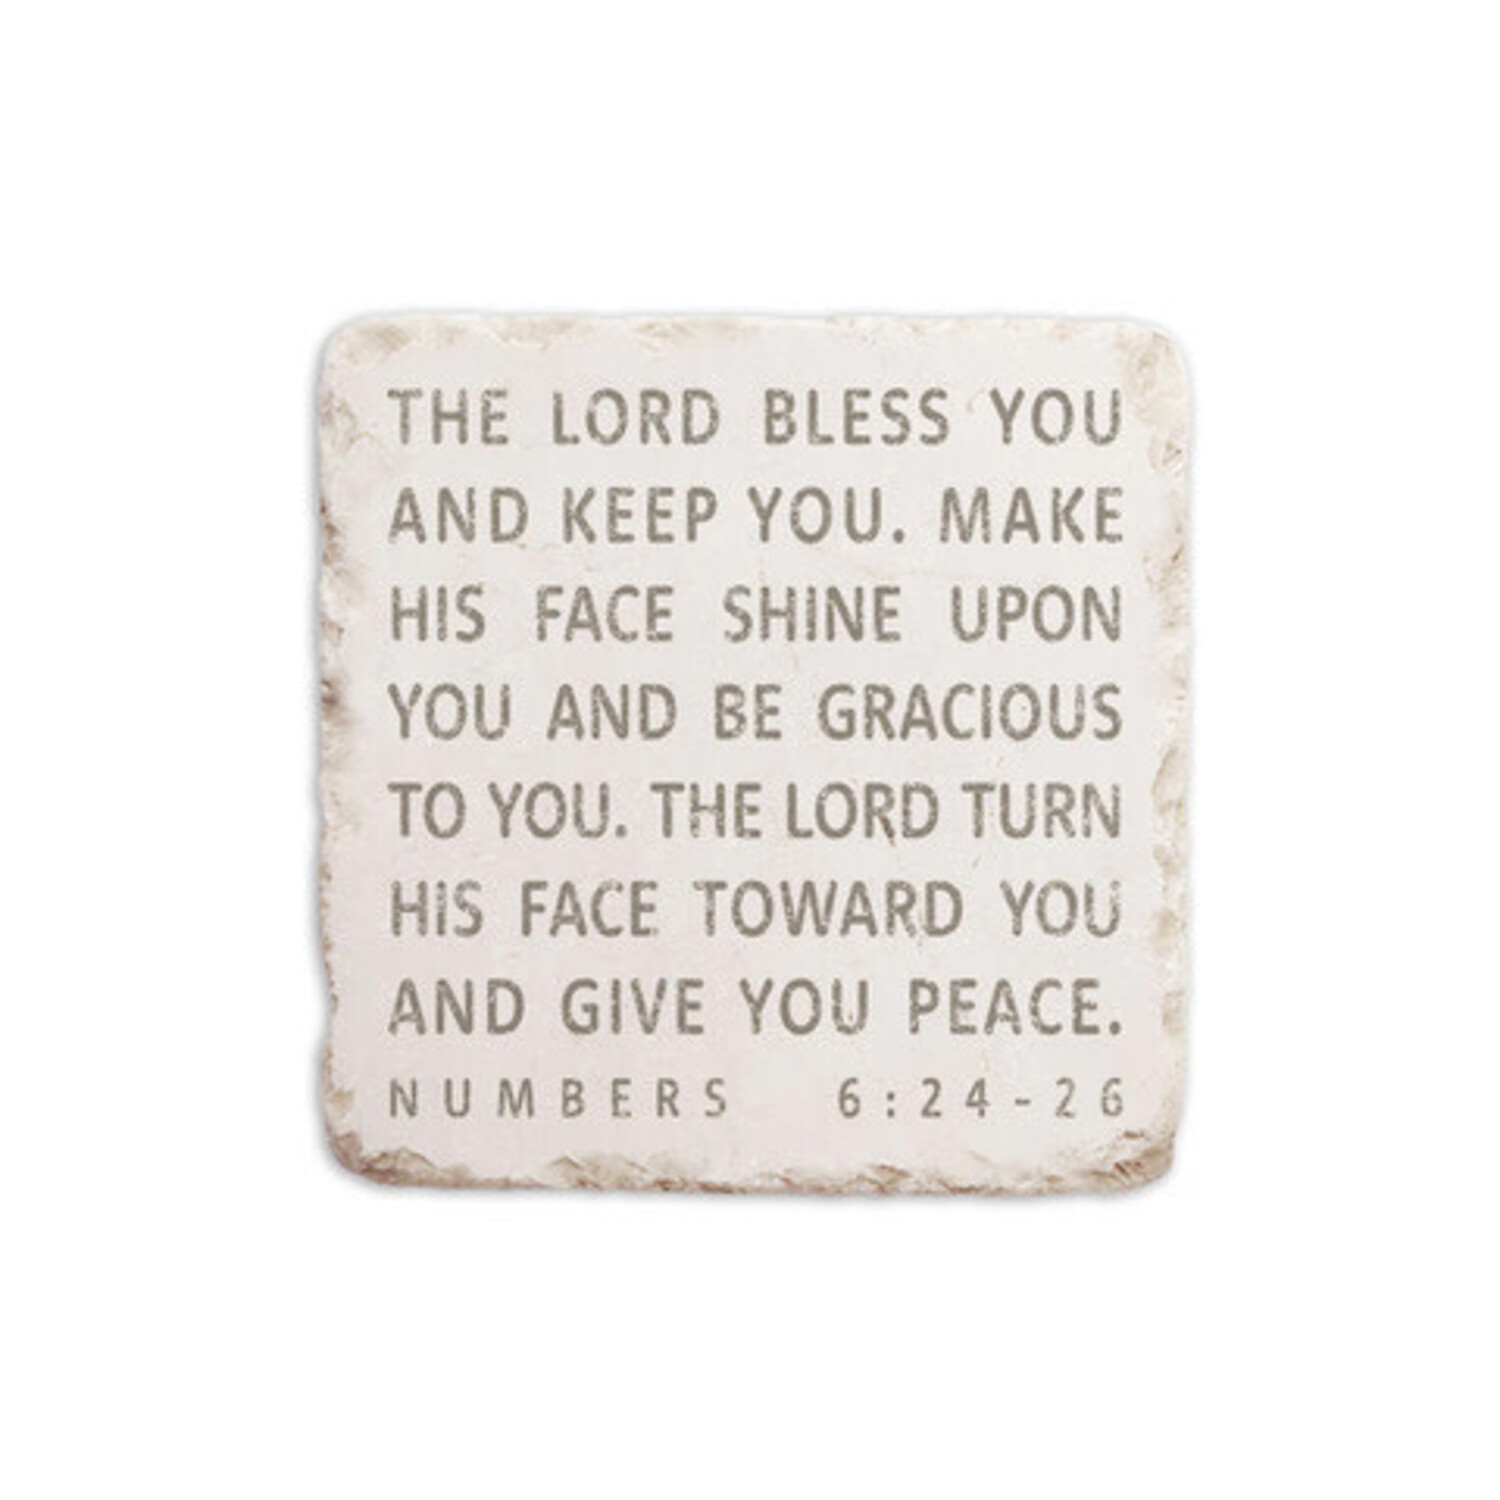 Numbers 6:24-26 - The Lord bless you and keep you; the Lord make his face  shine on you and be gracious to you; the Lord turn his face toward you and